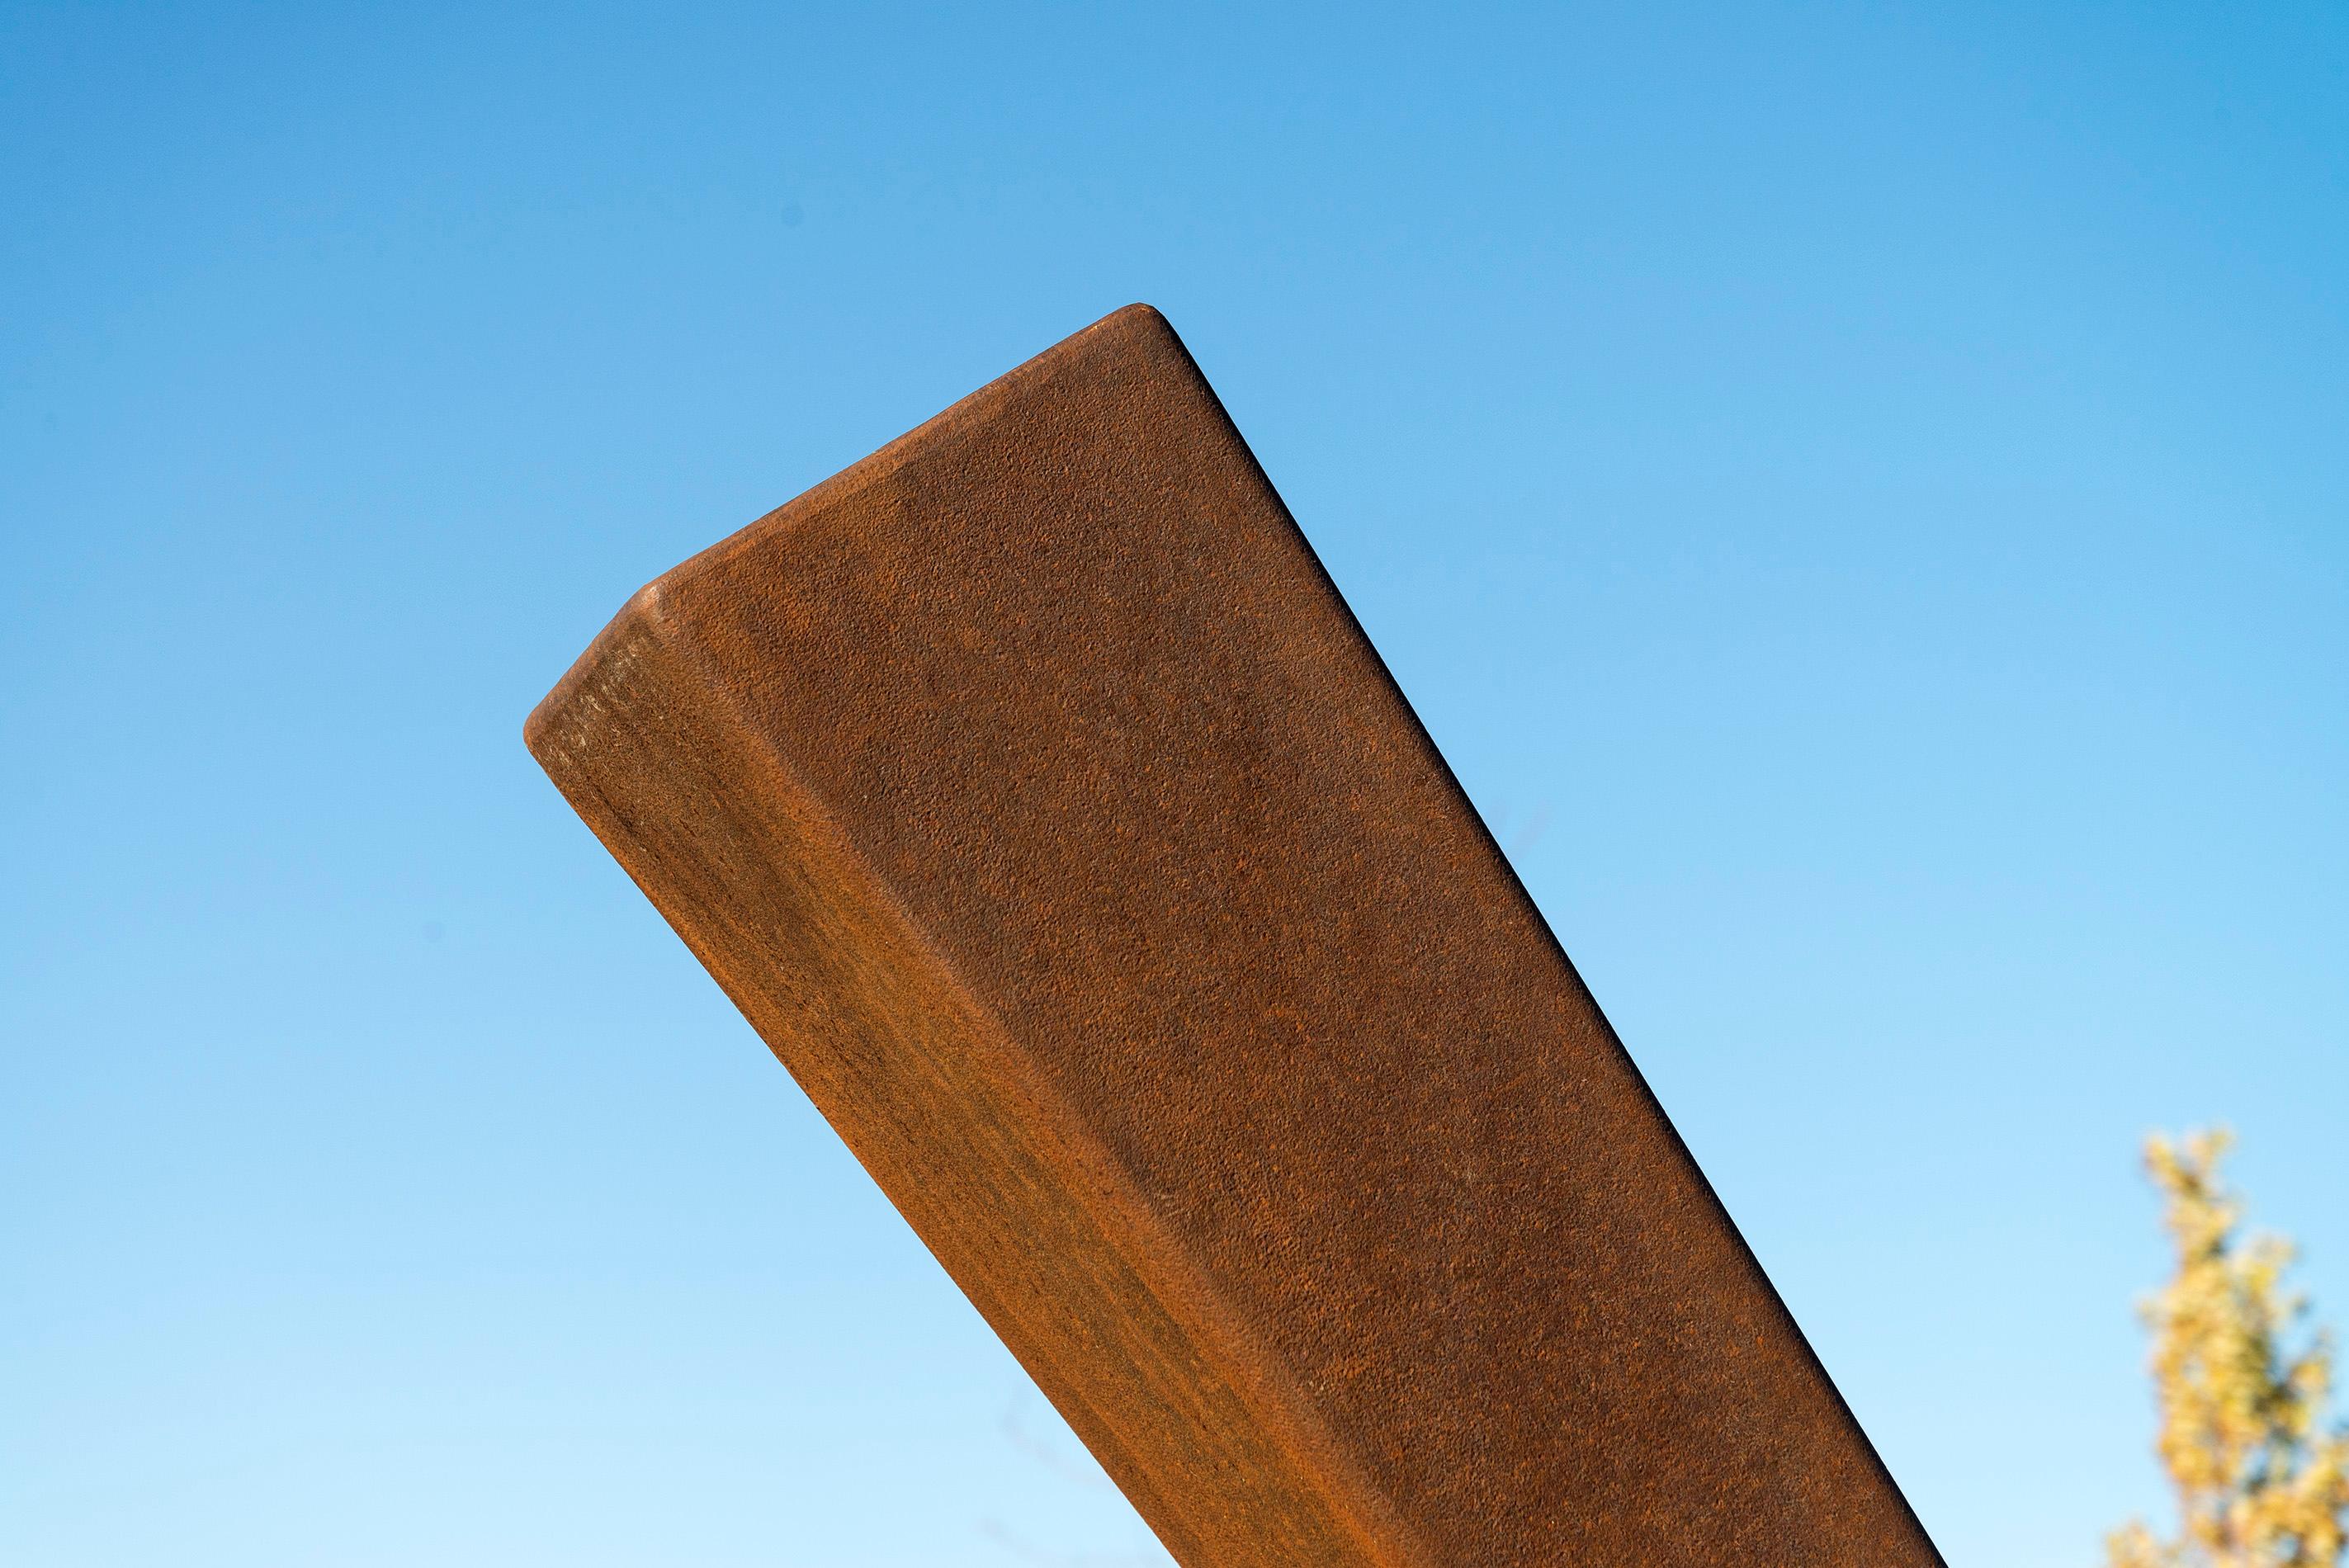 Trajectory No 7 - large, geometric, abstract, corten steel outdoor sculpture - Contemporary Sculpture by Claude Millette